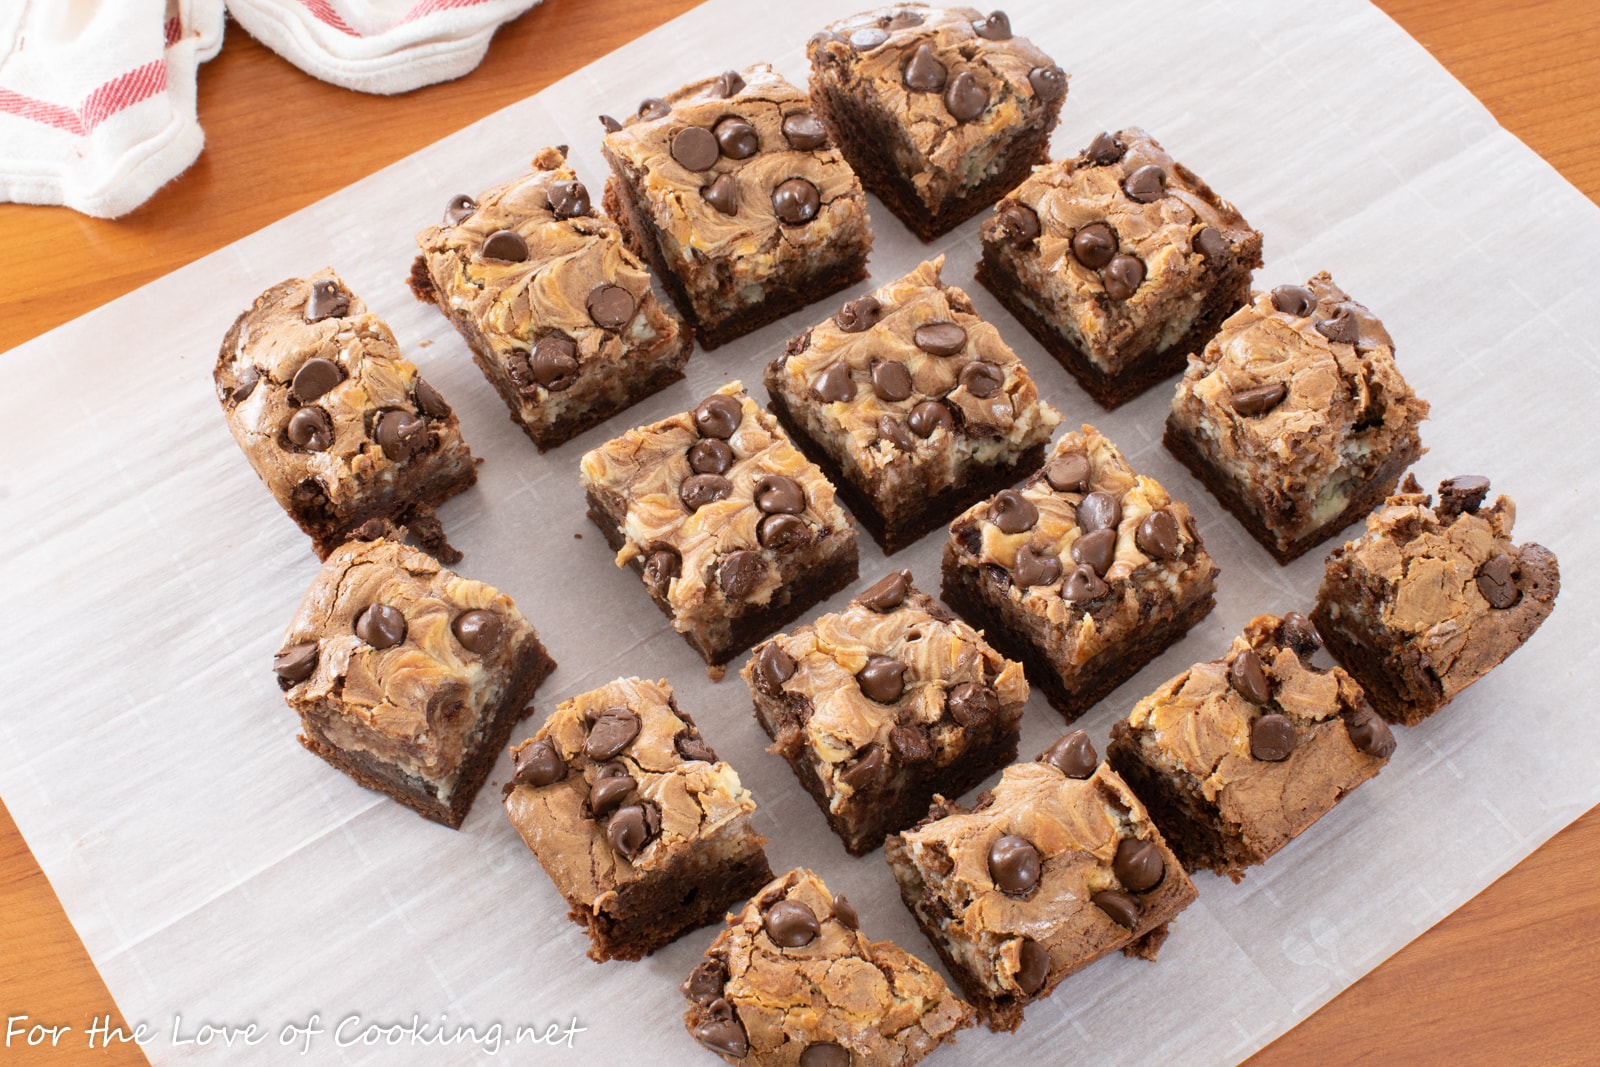 https://fortheloveofcooking-net.exactdn.com/wp-content/uploads/2019/05/Chocolate-Chip-Cheesecake-Brownies-6891.jpg?strip=all&lossy=1&quality=90&w=2560&ssl=1